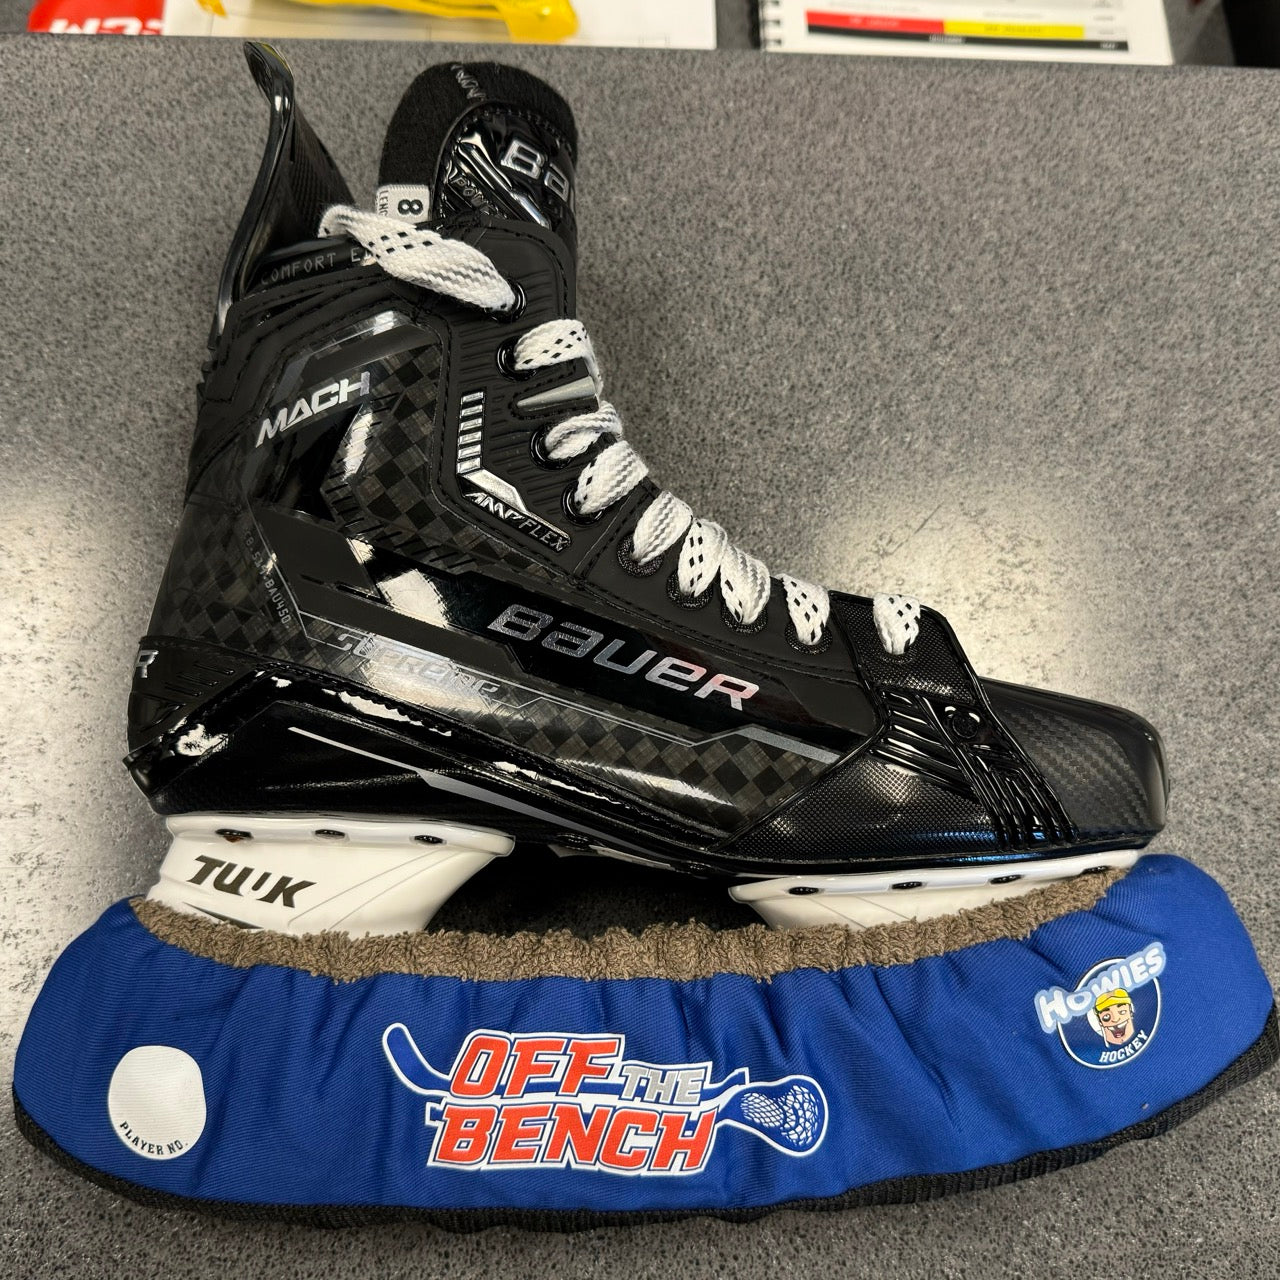 HOWIES SKATE GUARDS